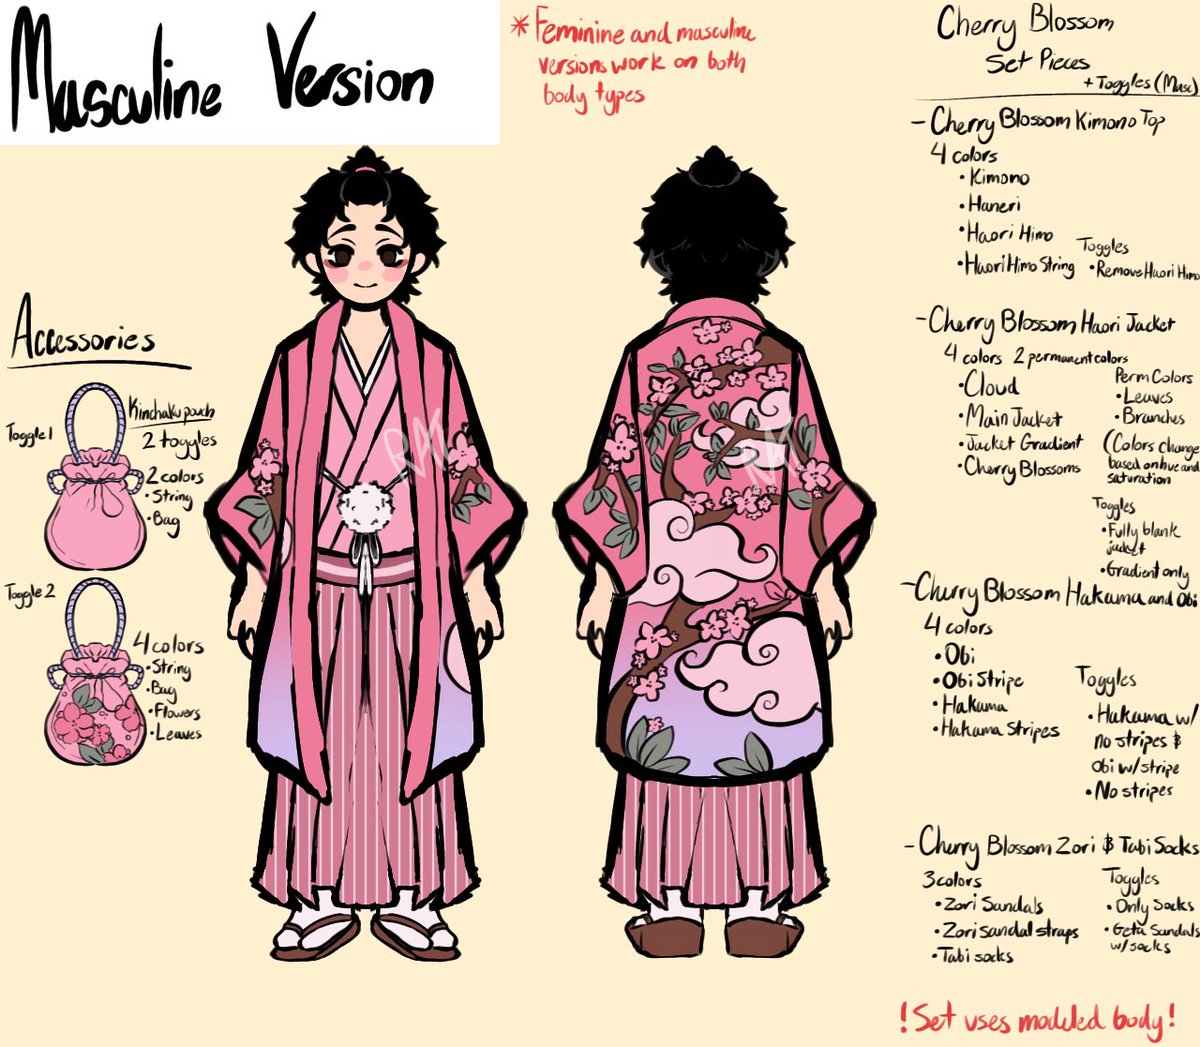 Made a full rework concept of the Cherry Blossom Kimono! 🌸

#royalehigh #royalehighconcept #royalehighconcepts #beaplaysconcepts